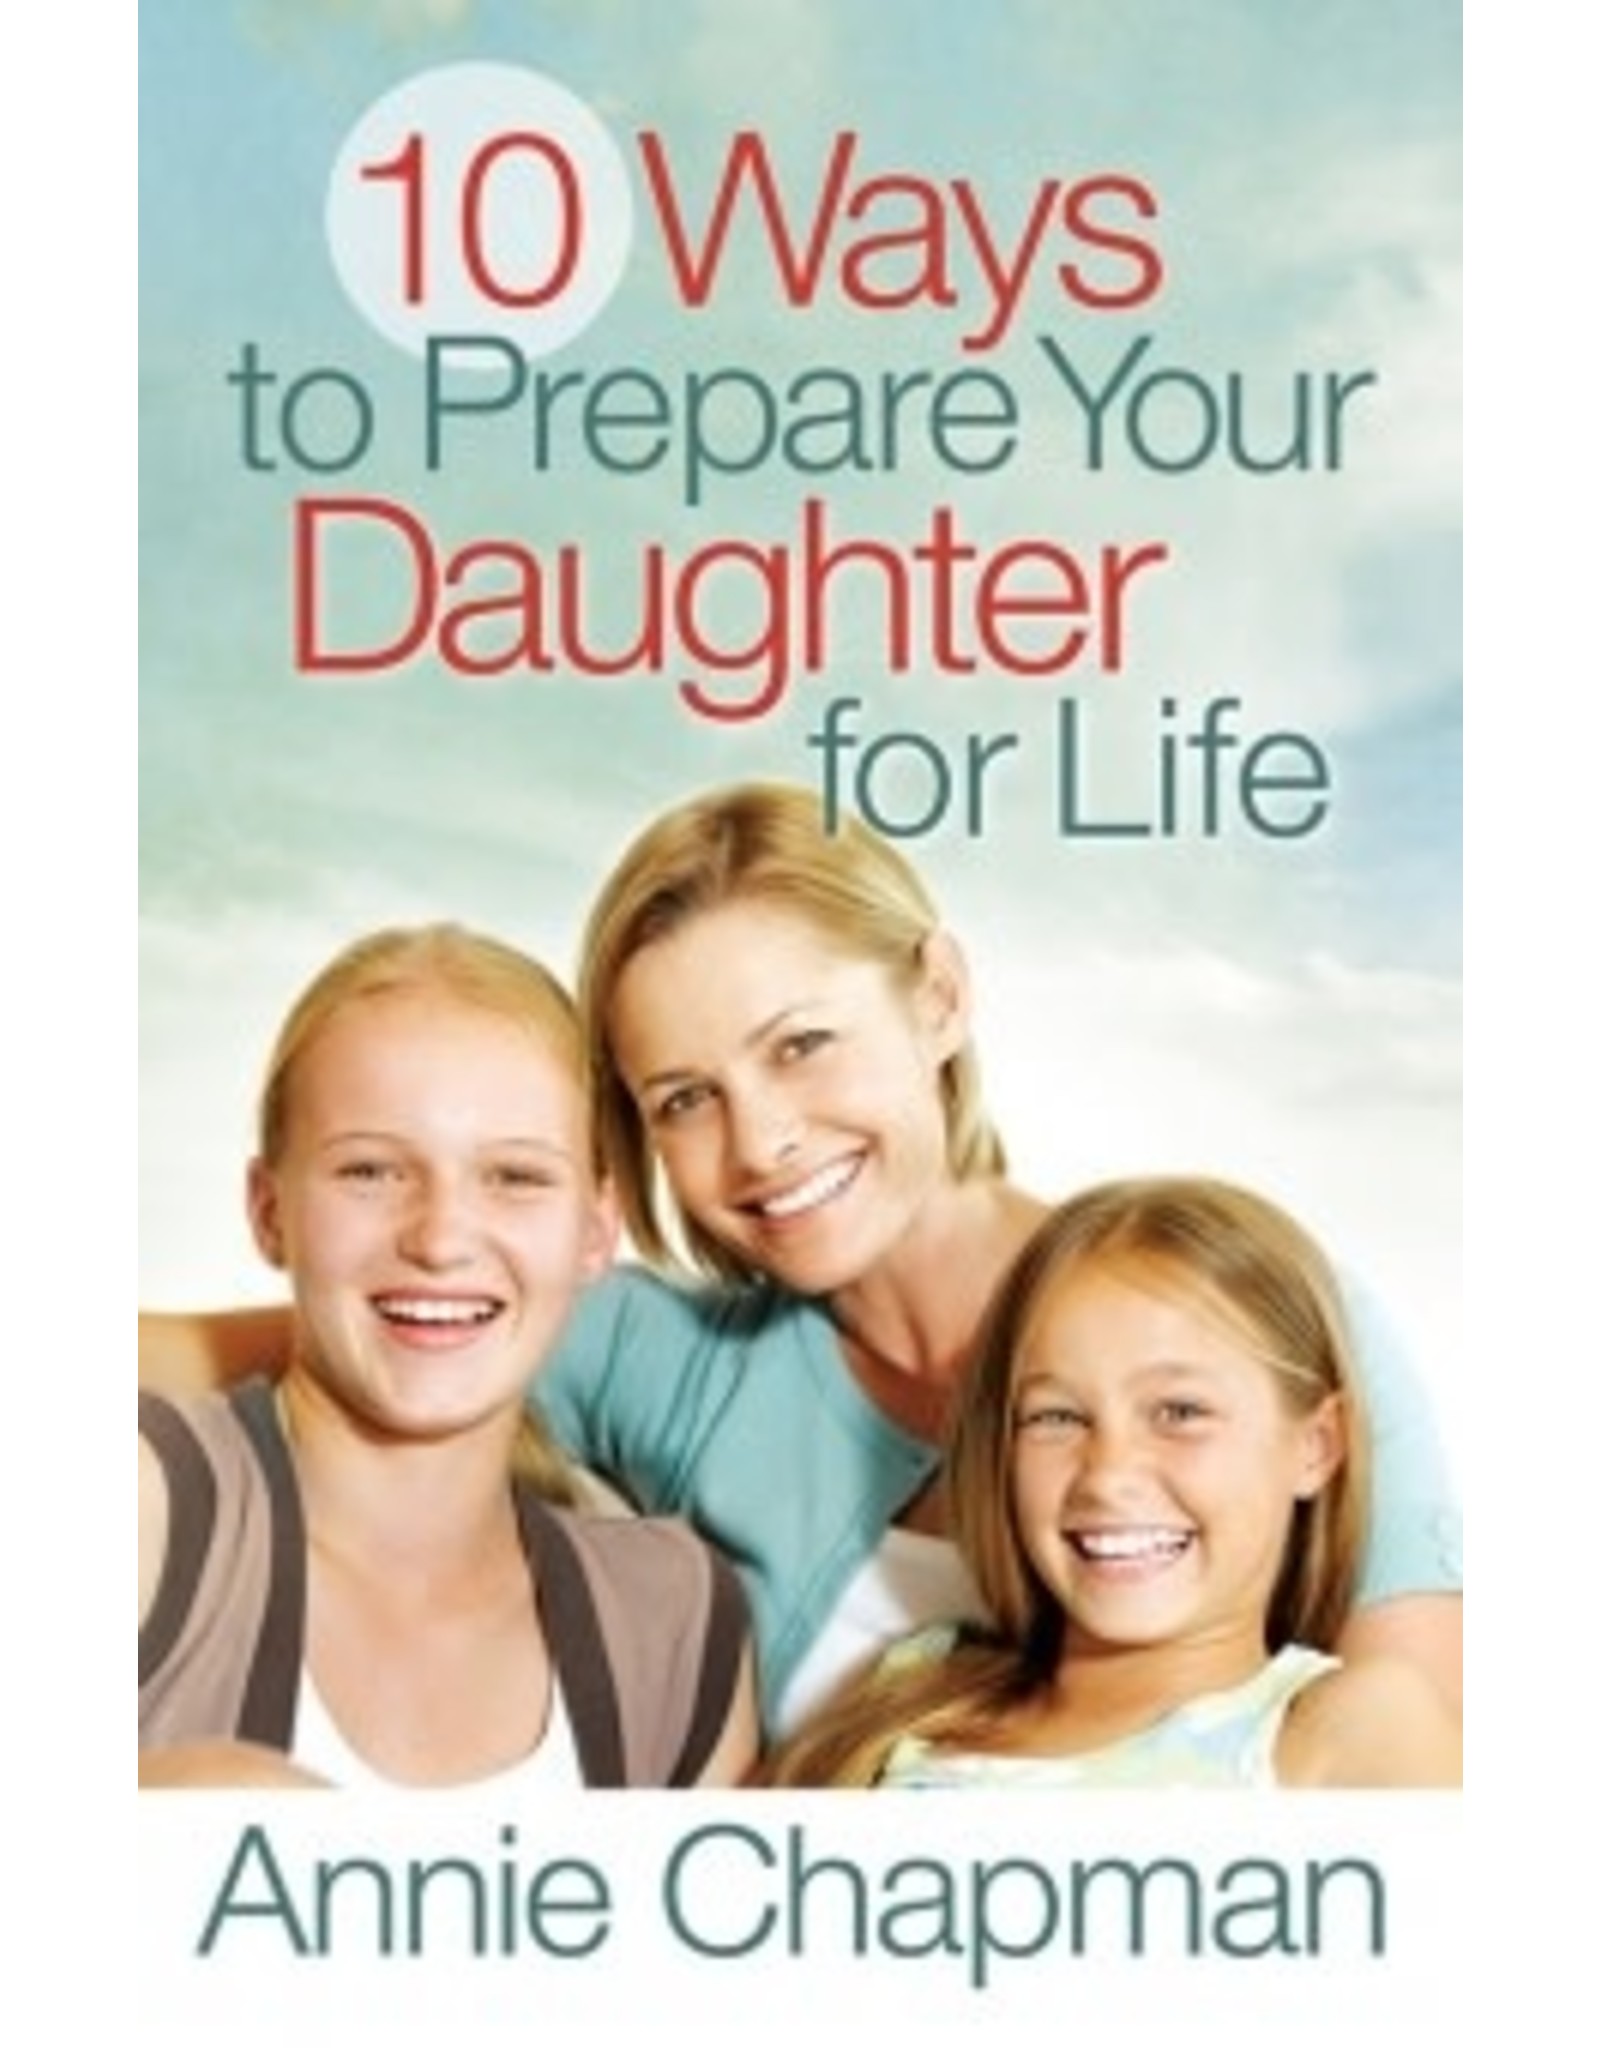 Annie Chapman 10 Ways to Prepare Your Daughter for Life